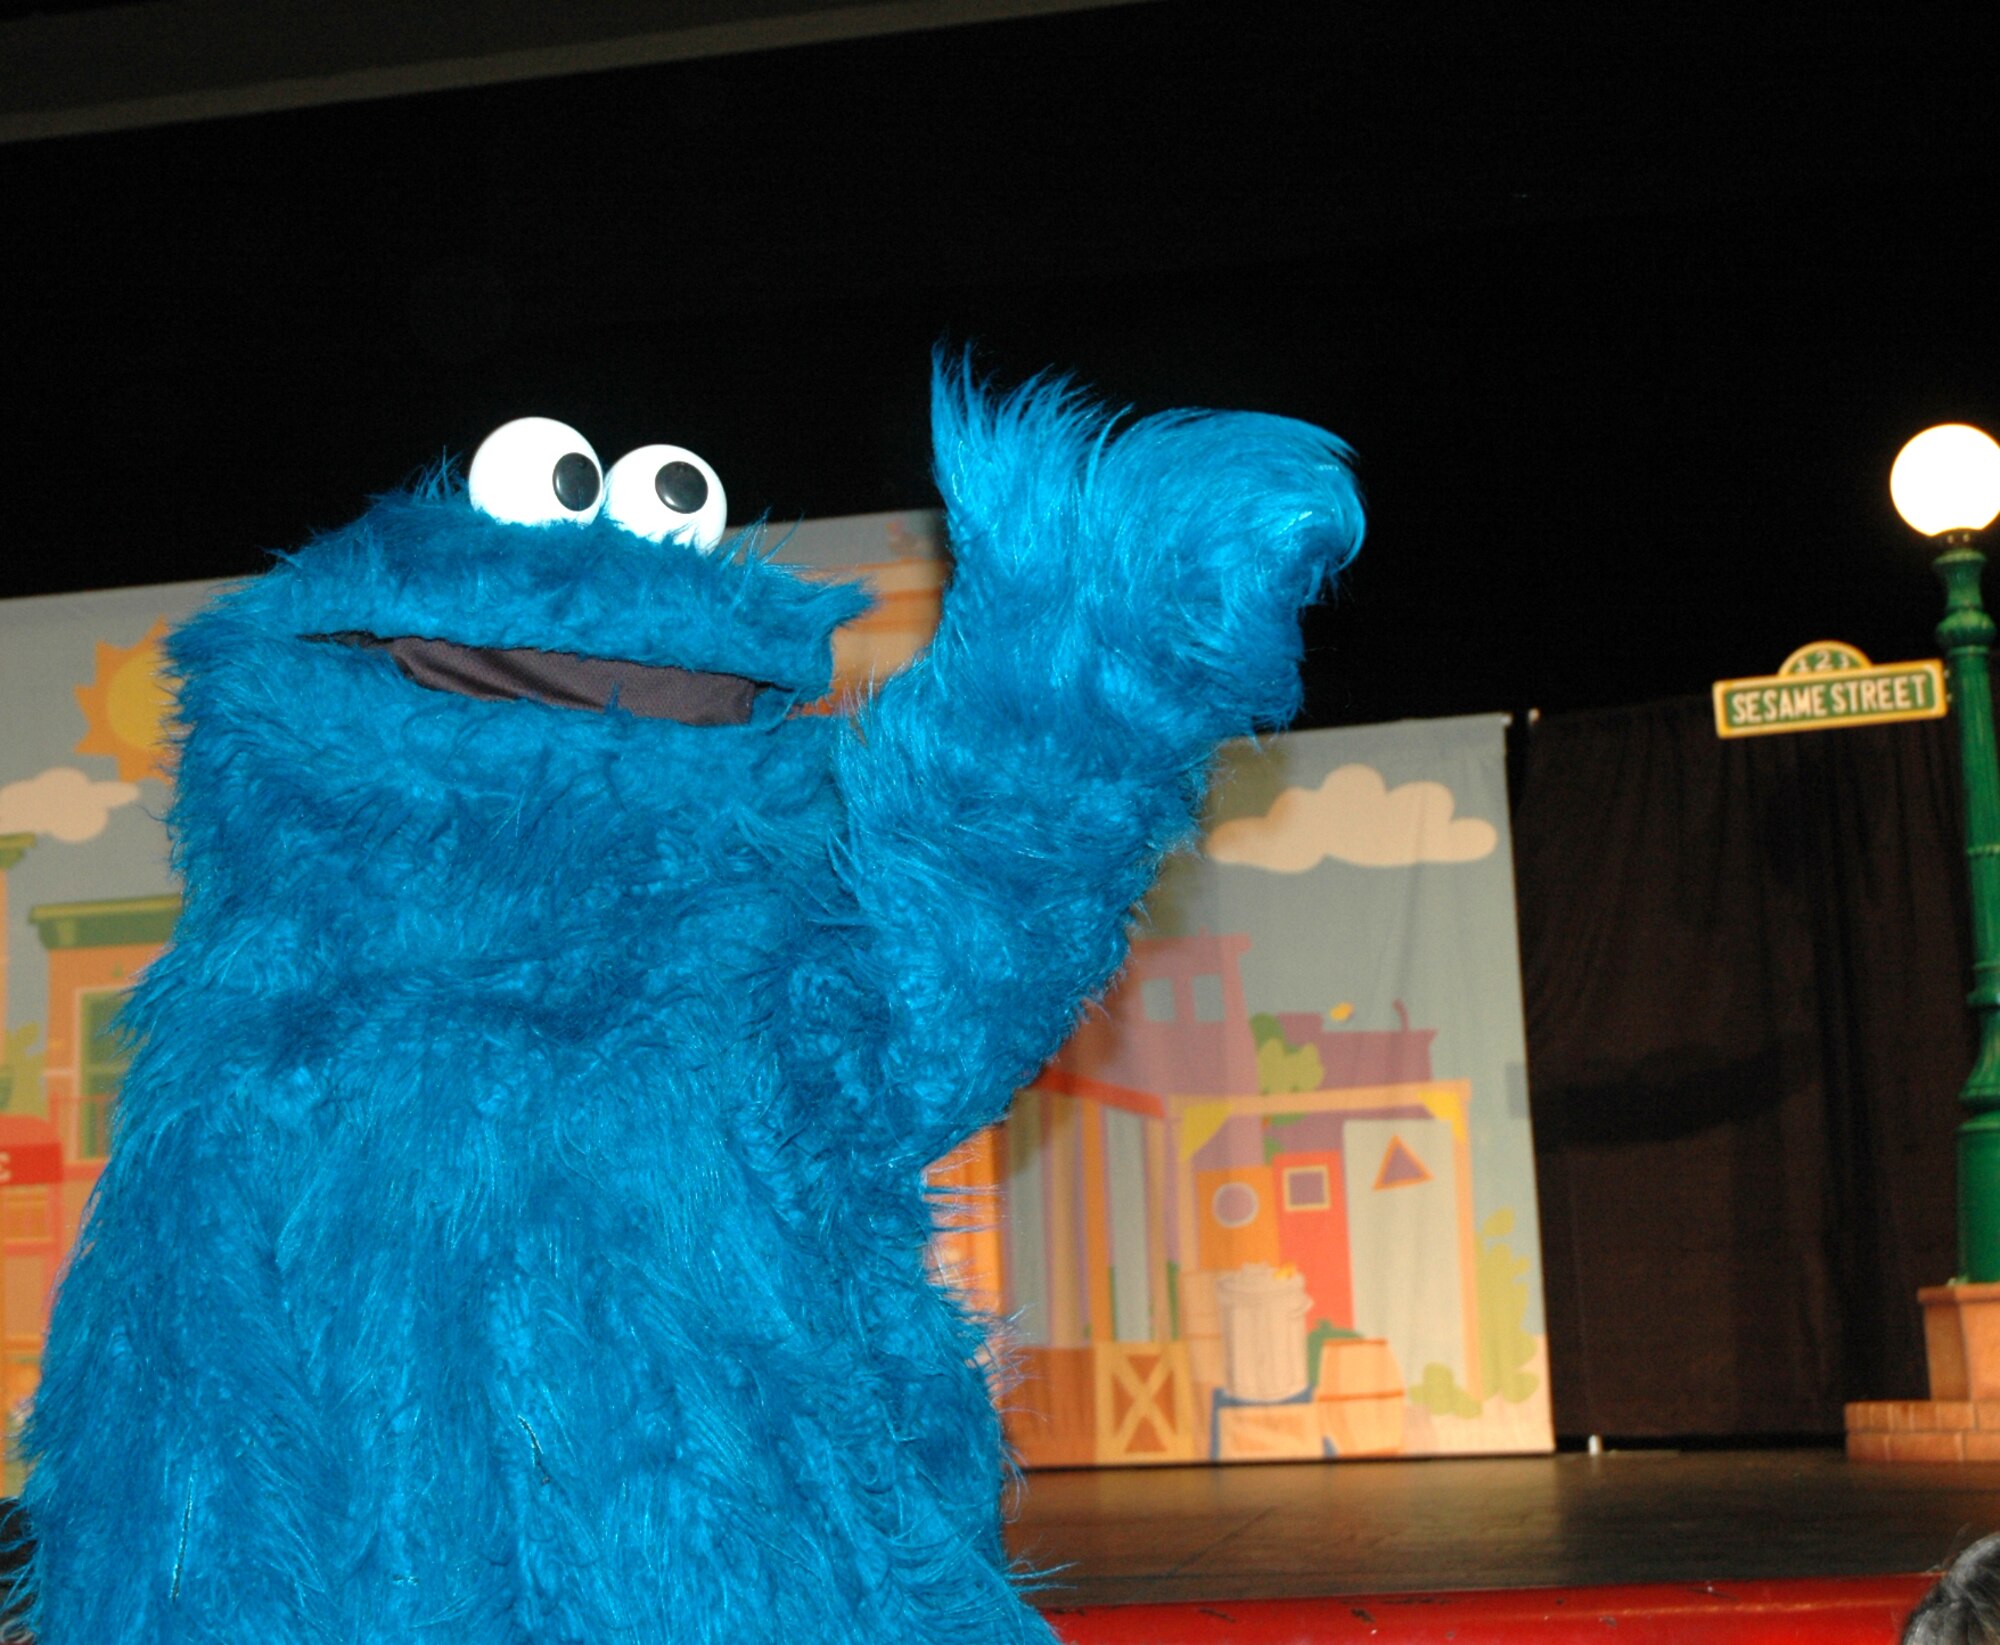 Cookie Monster waves good-bye to the children at the end of the show at North Ridge High School in Layton, August 1.  (U.S. photo by Airman 1st Class Robby Hedrick)